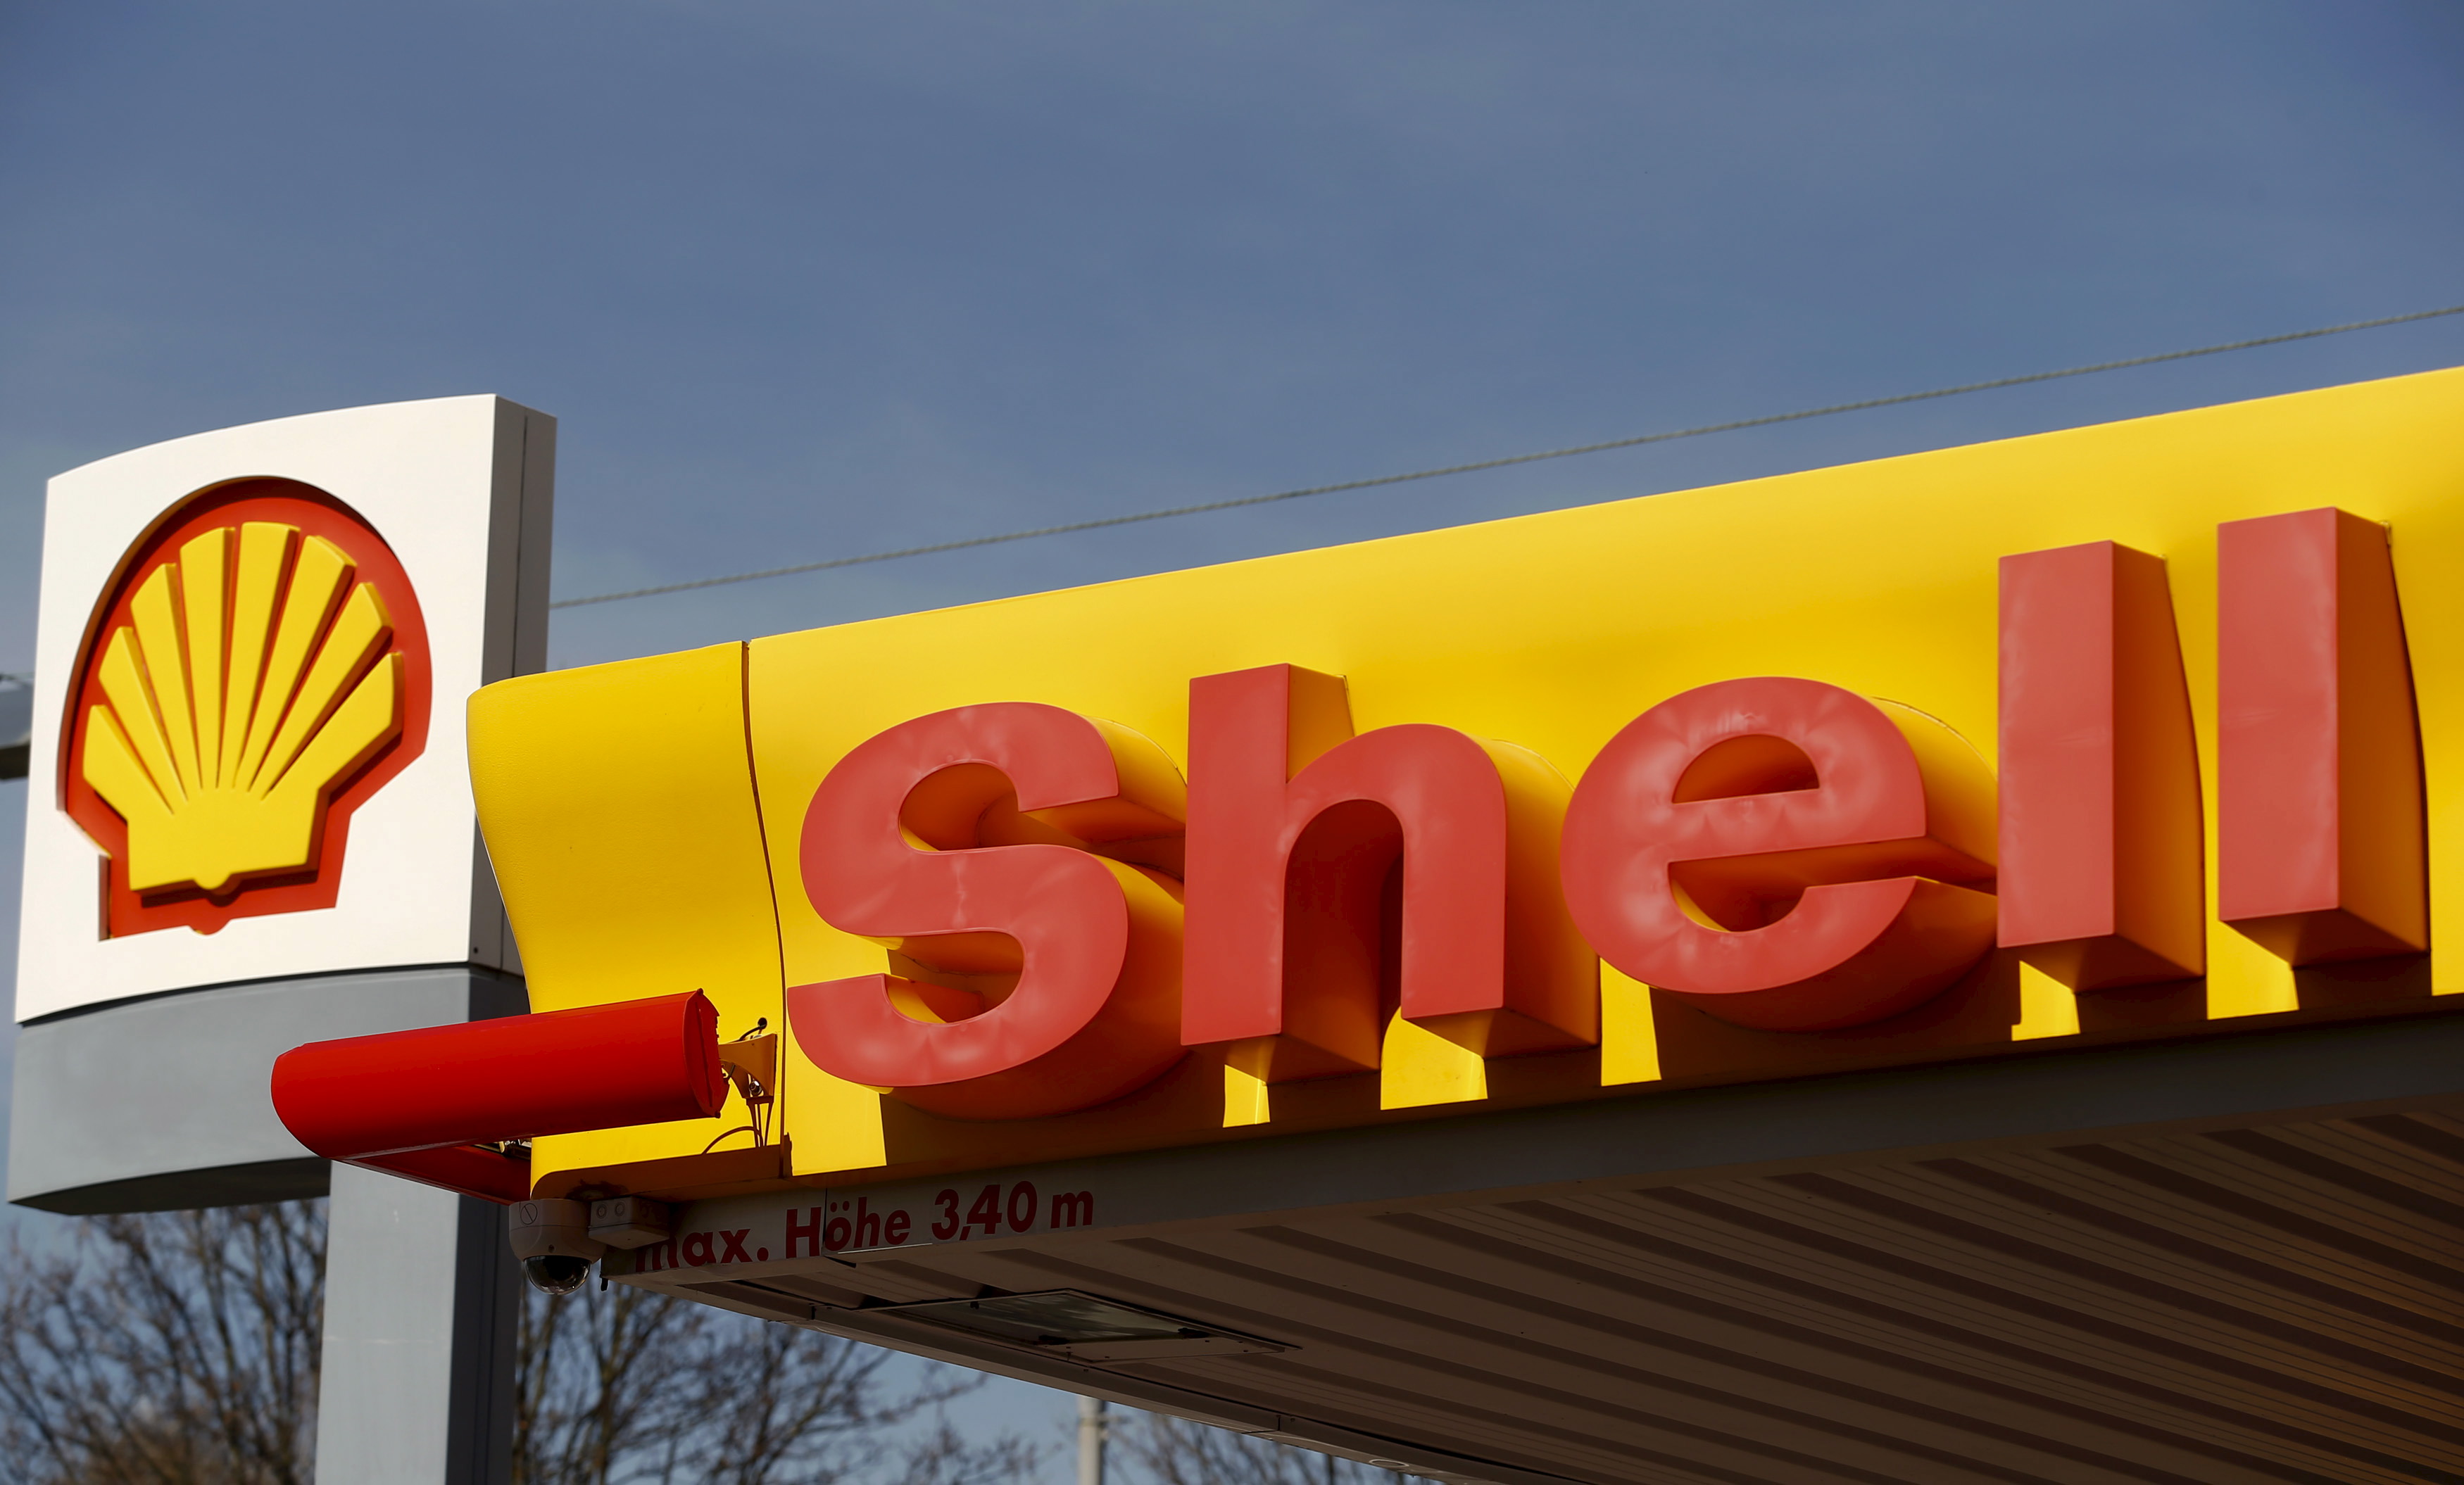 Shell's company logo is pictured at a gas station in Zurich